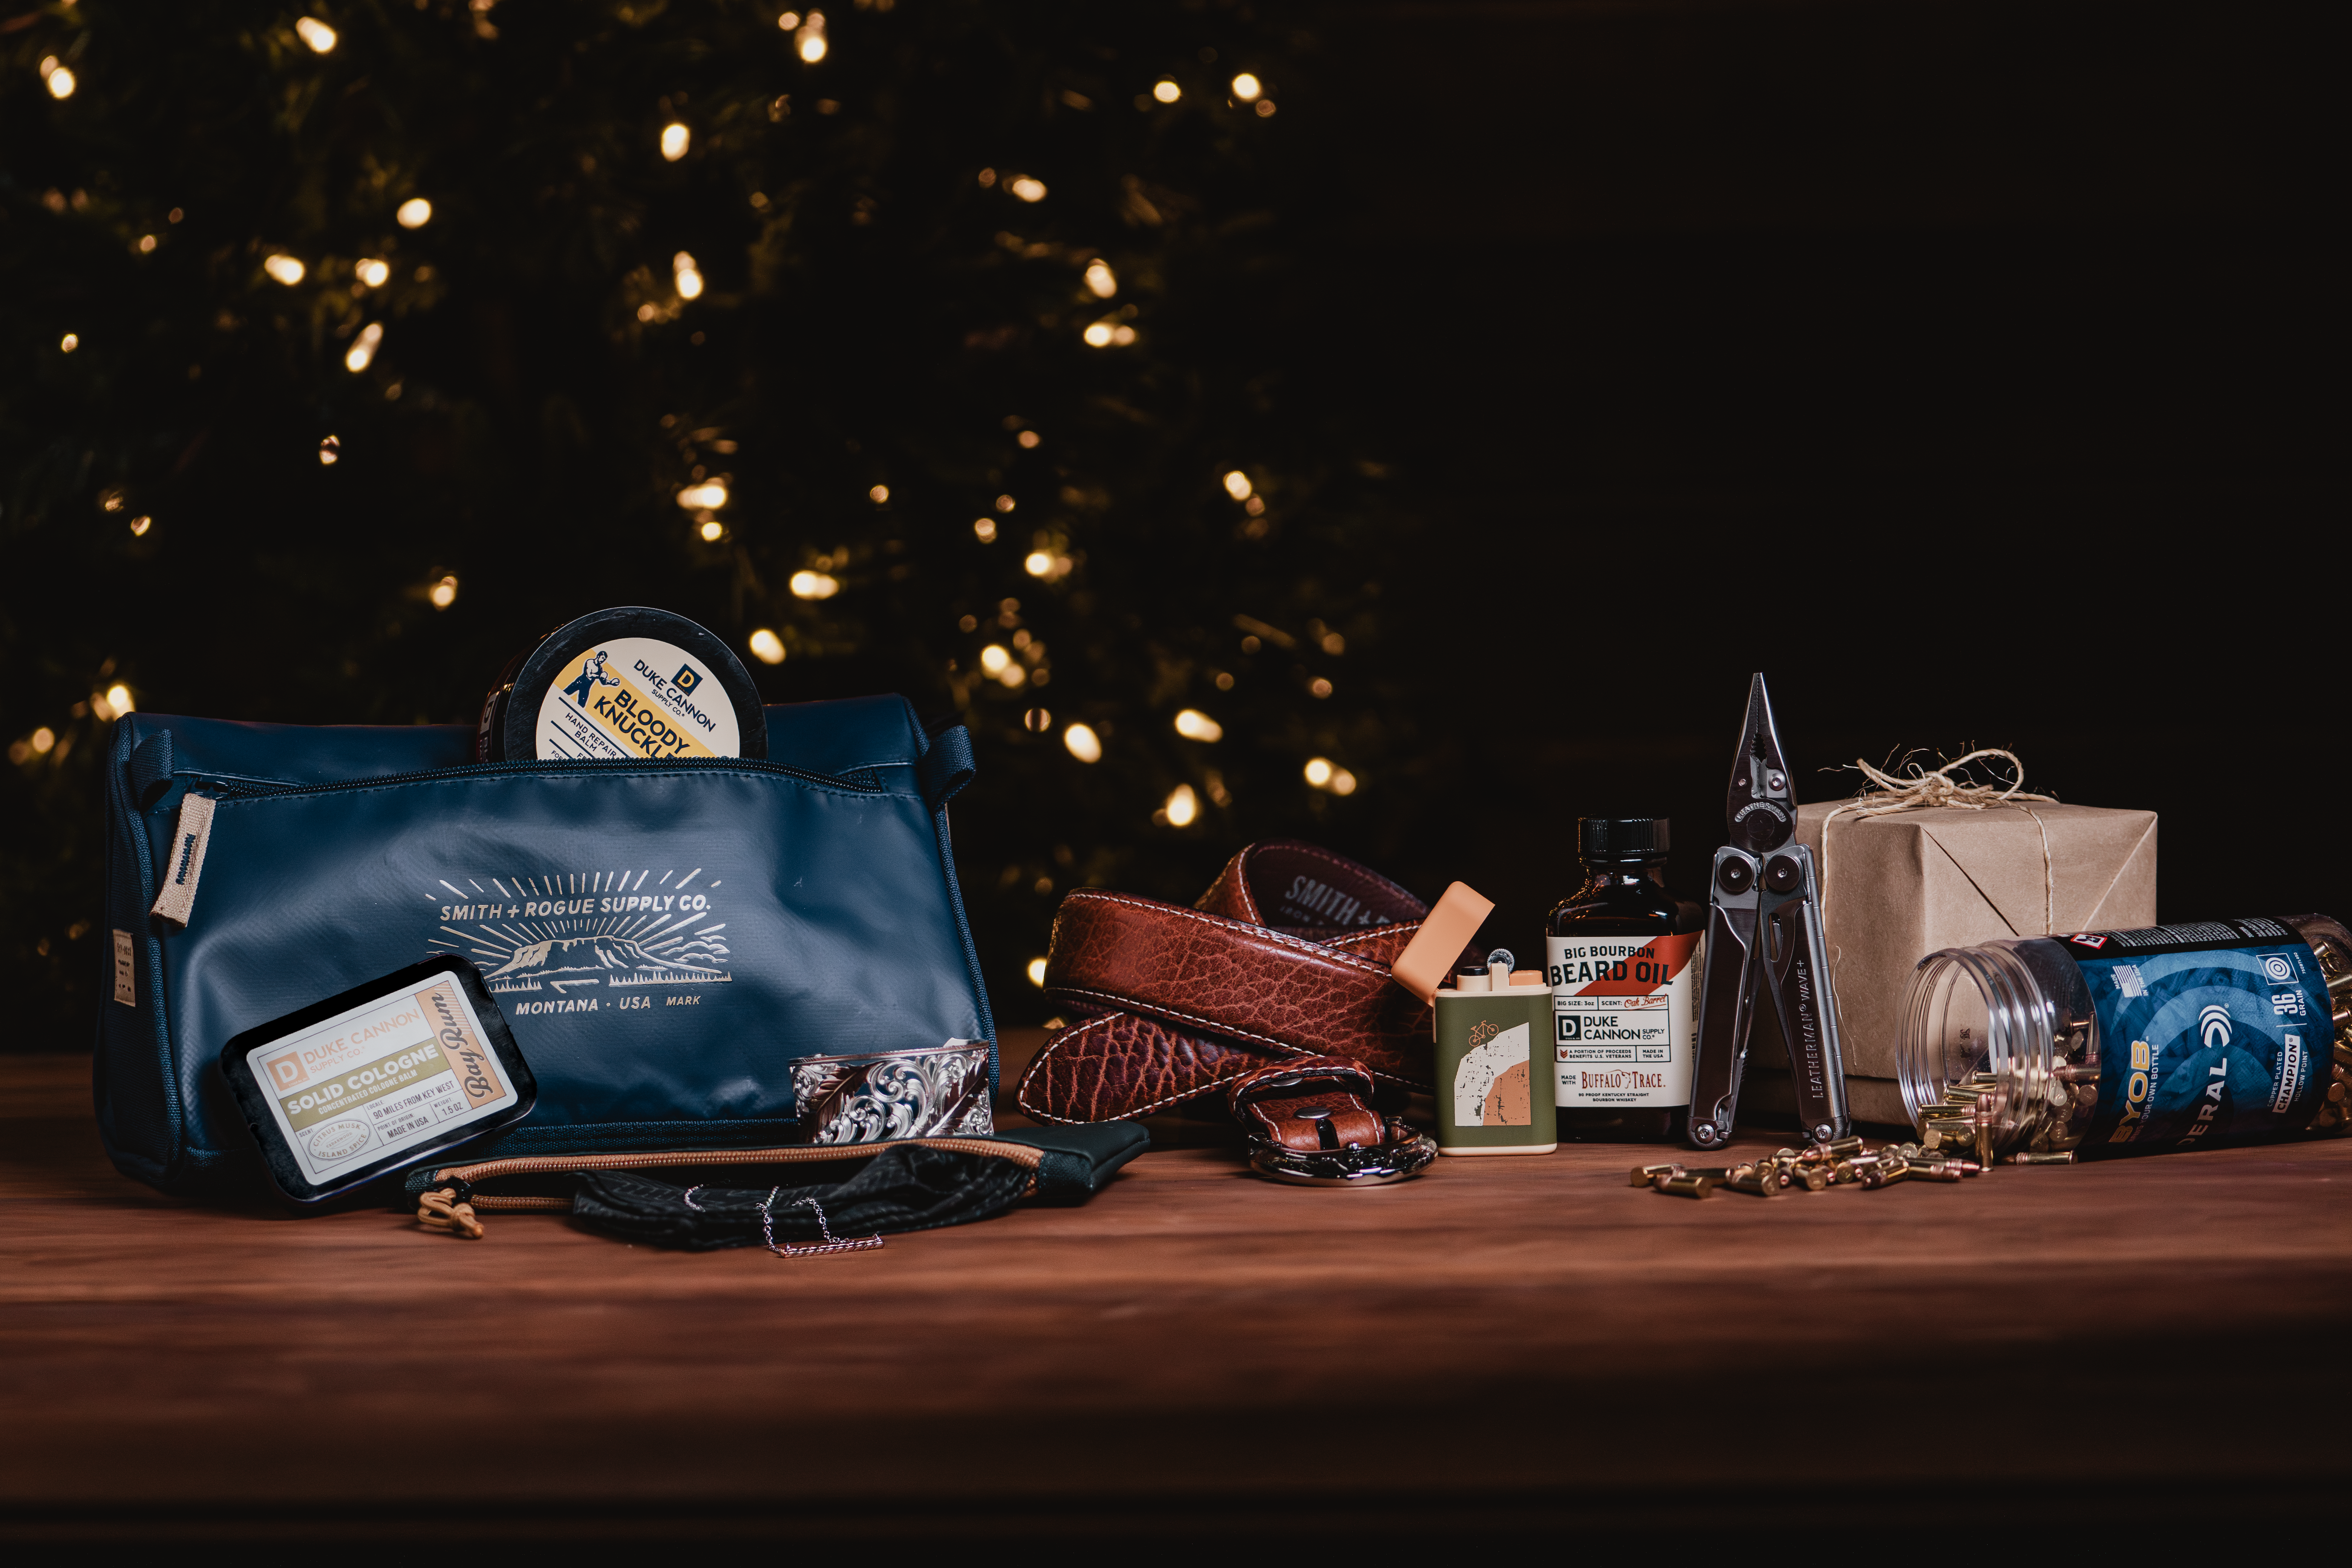 a festive lineup of several small gift ideas in front of a dimly lit christmas tree